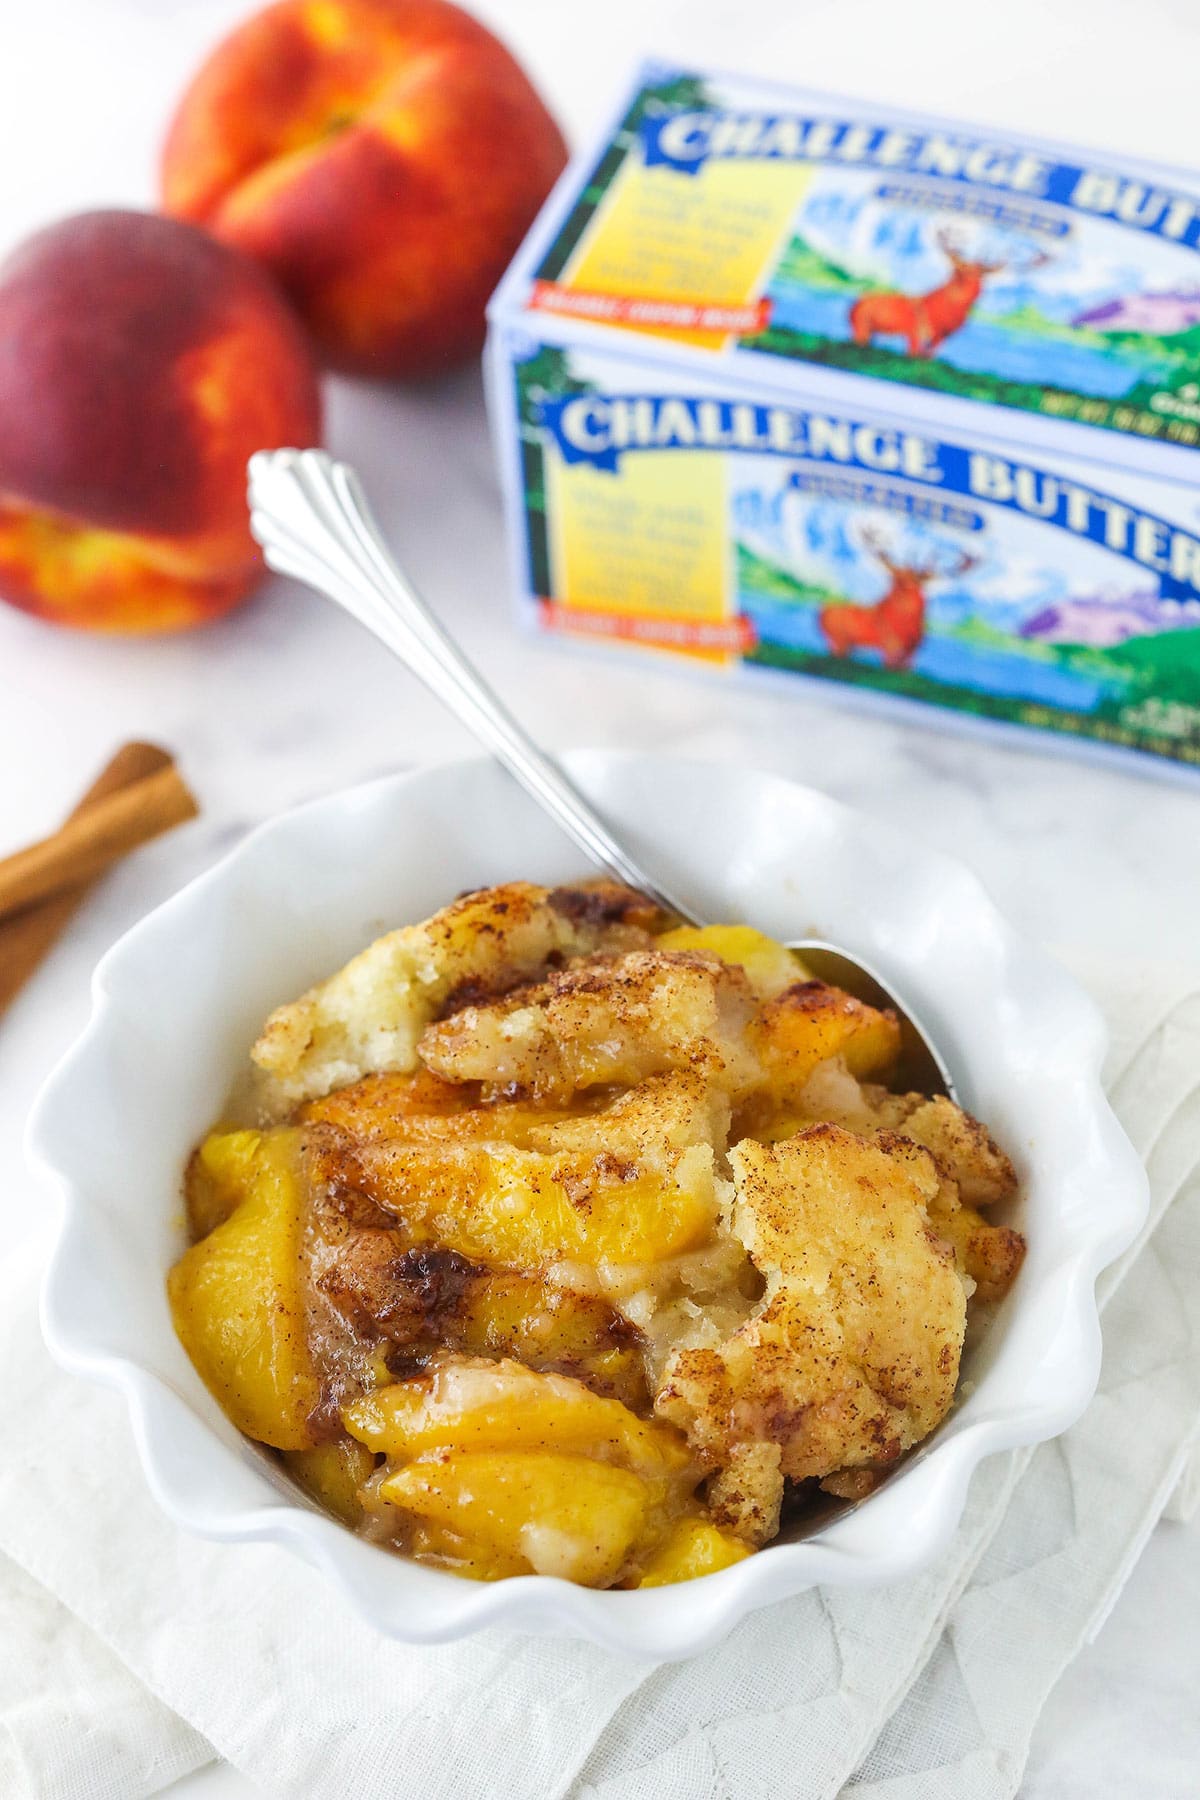 peach cobbler in white bowl with challenge butter in background